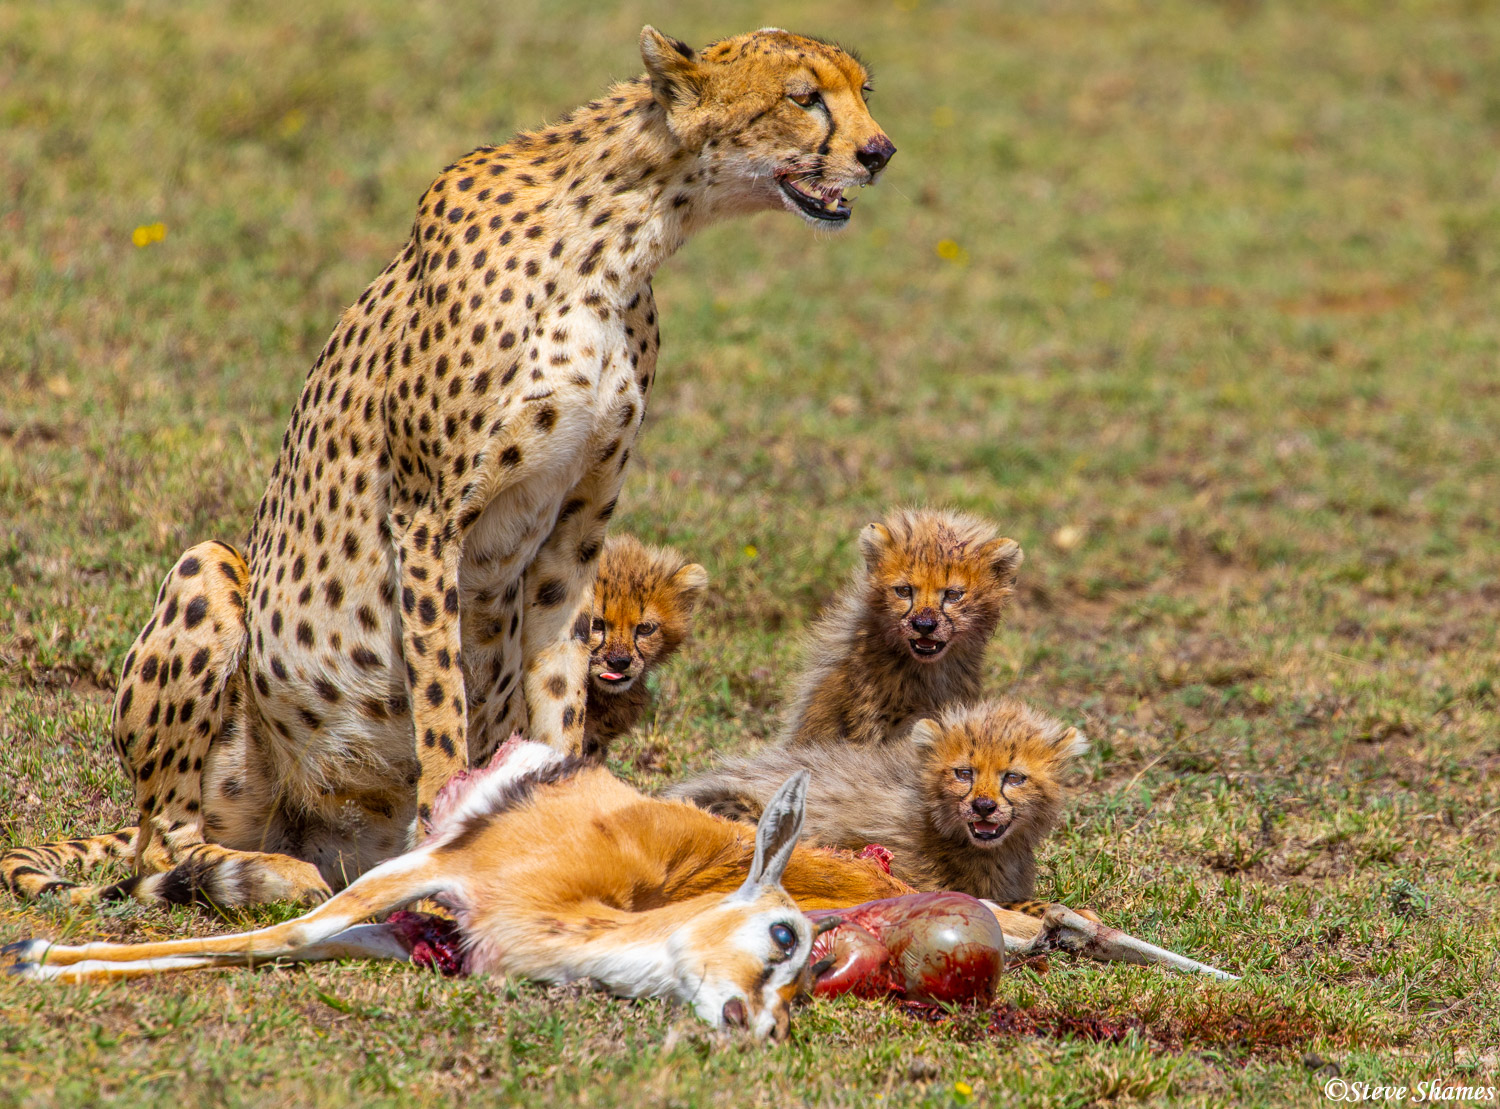 We came across a cheetah mother and a fresh kill with her three little cubs.